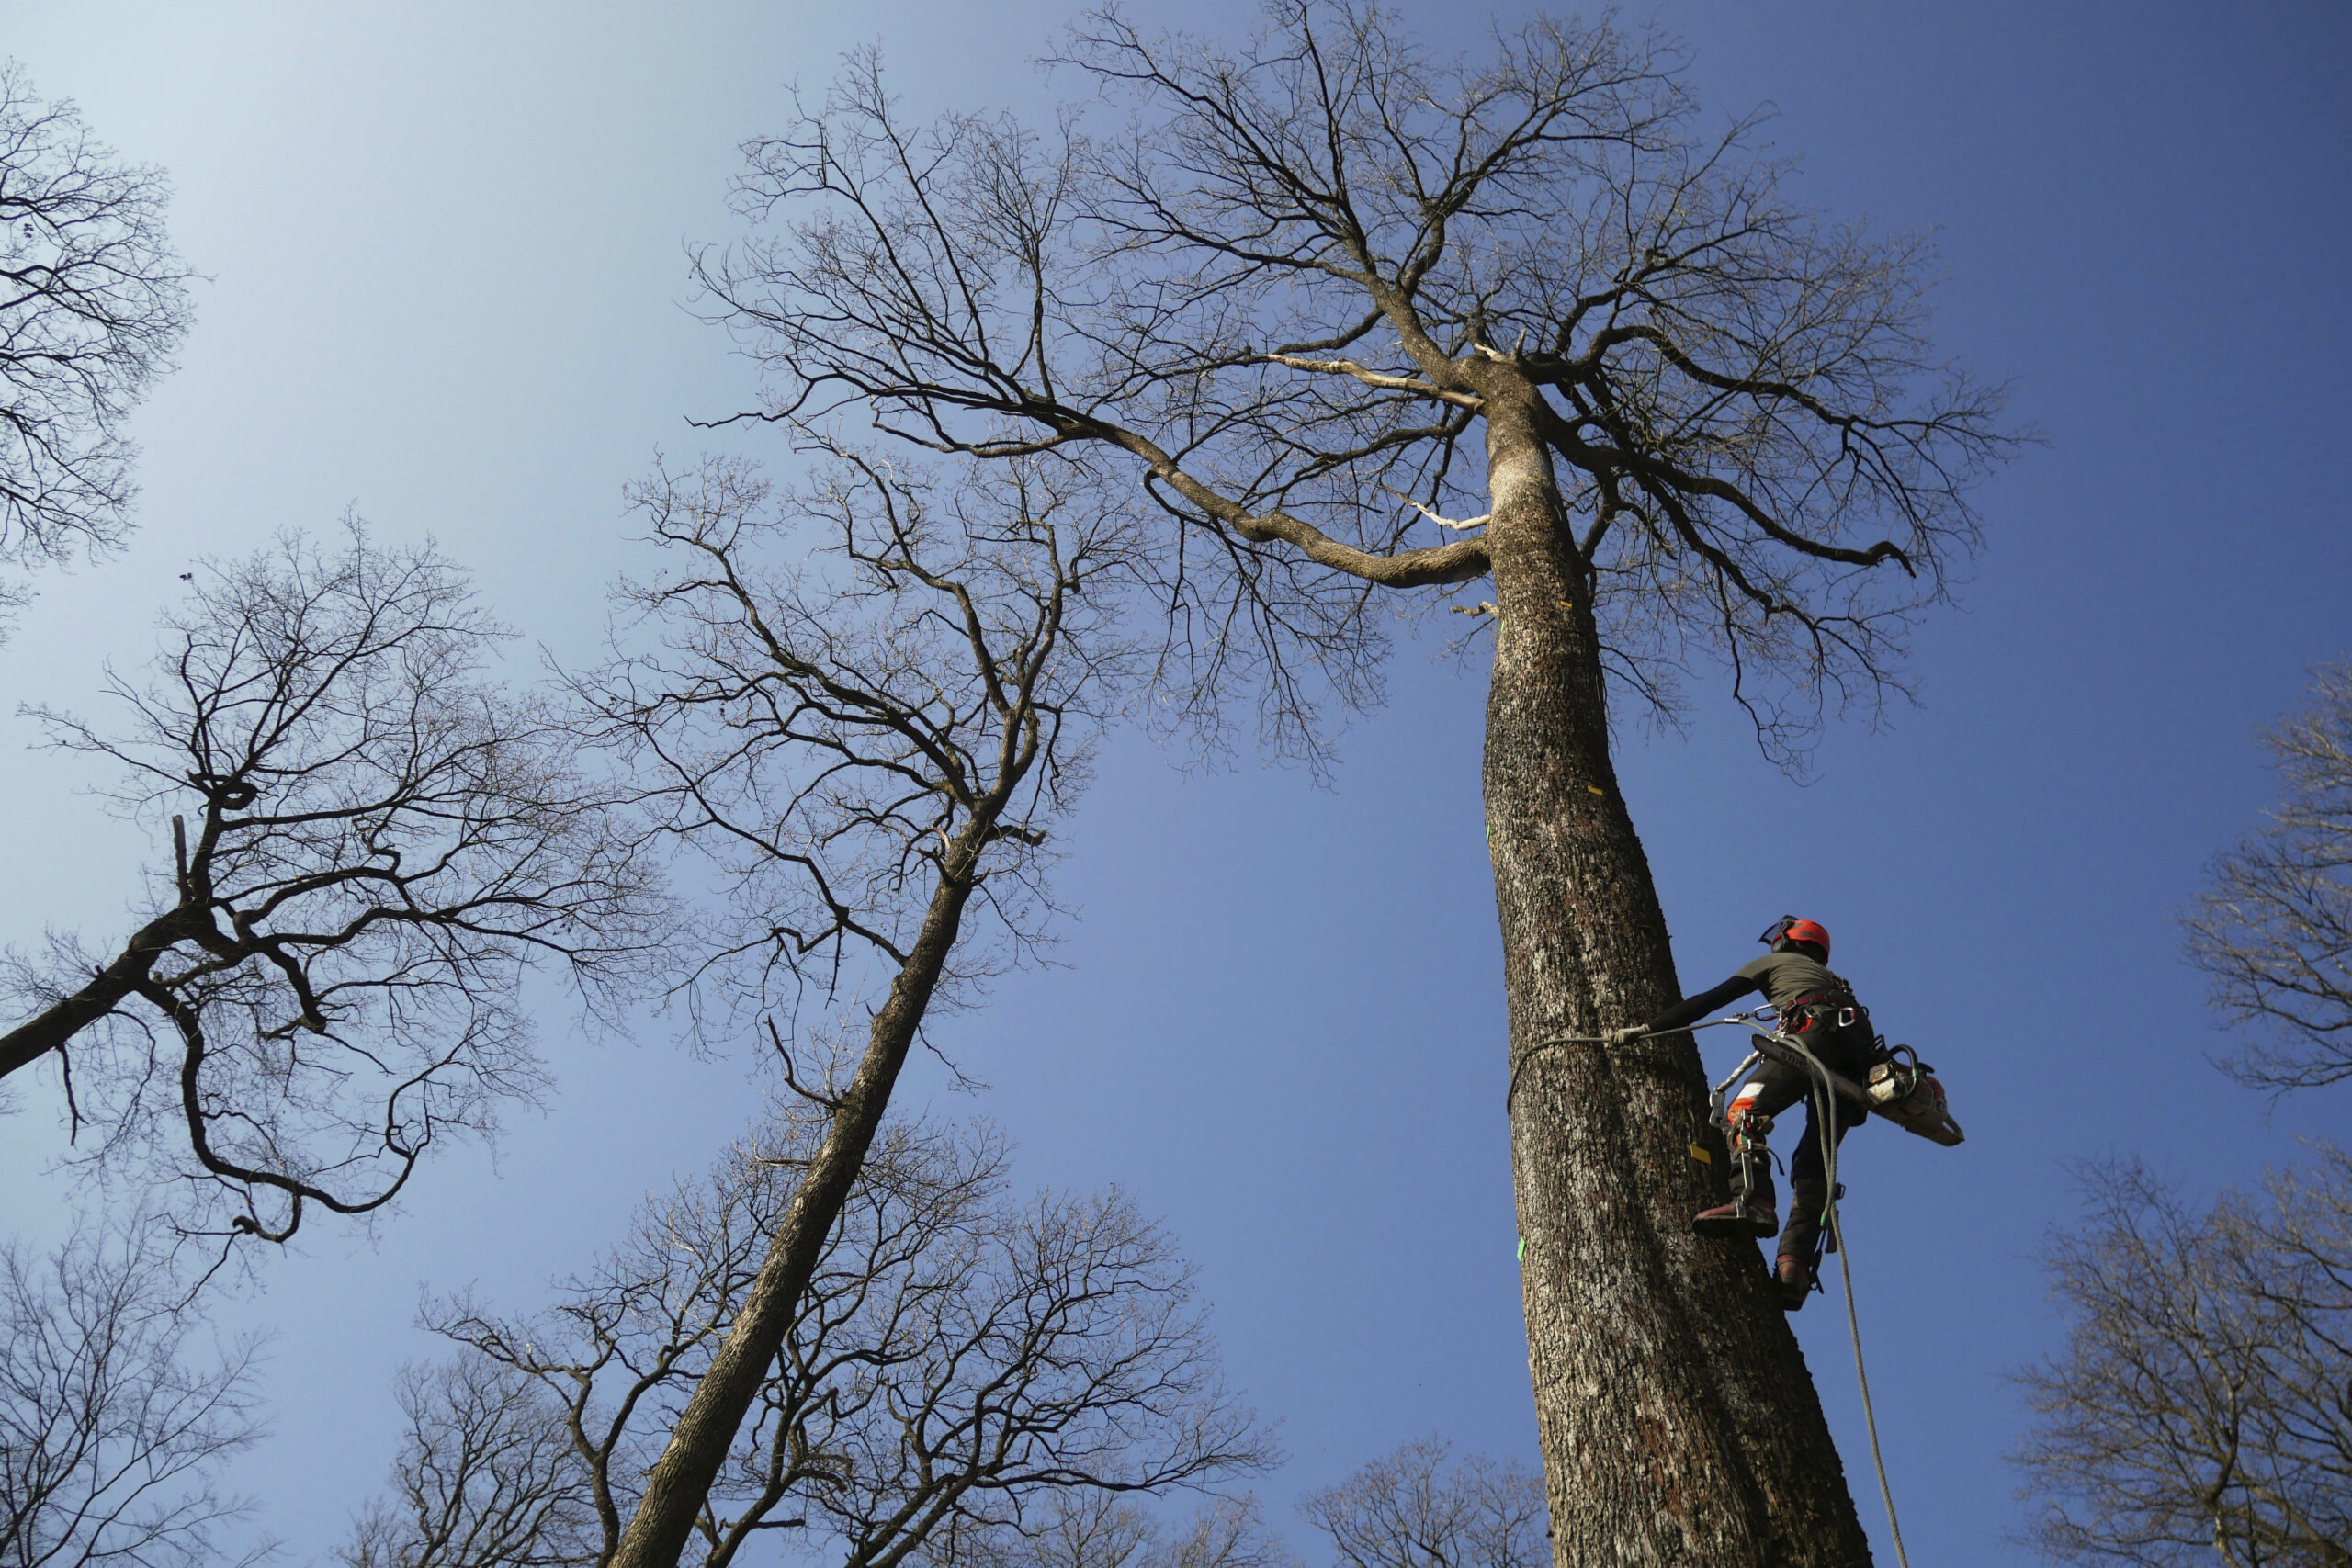 A forest worker climbs an oak in the Forest of Berce in the Loire region, Tuesday, March 9, 2021. In a former royal forest in France, four 200-year-old oaks are being felled for wood to reconstruct Notre Dame cathedral's fallen spire. (AP Photo/Thibault Camus)